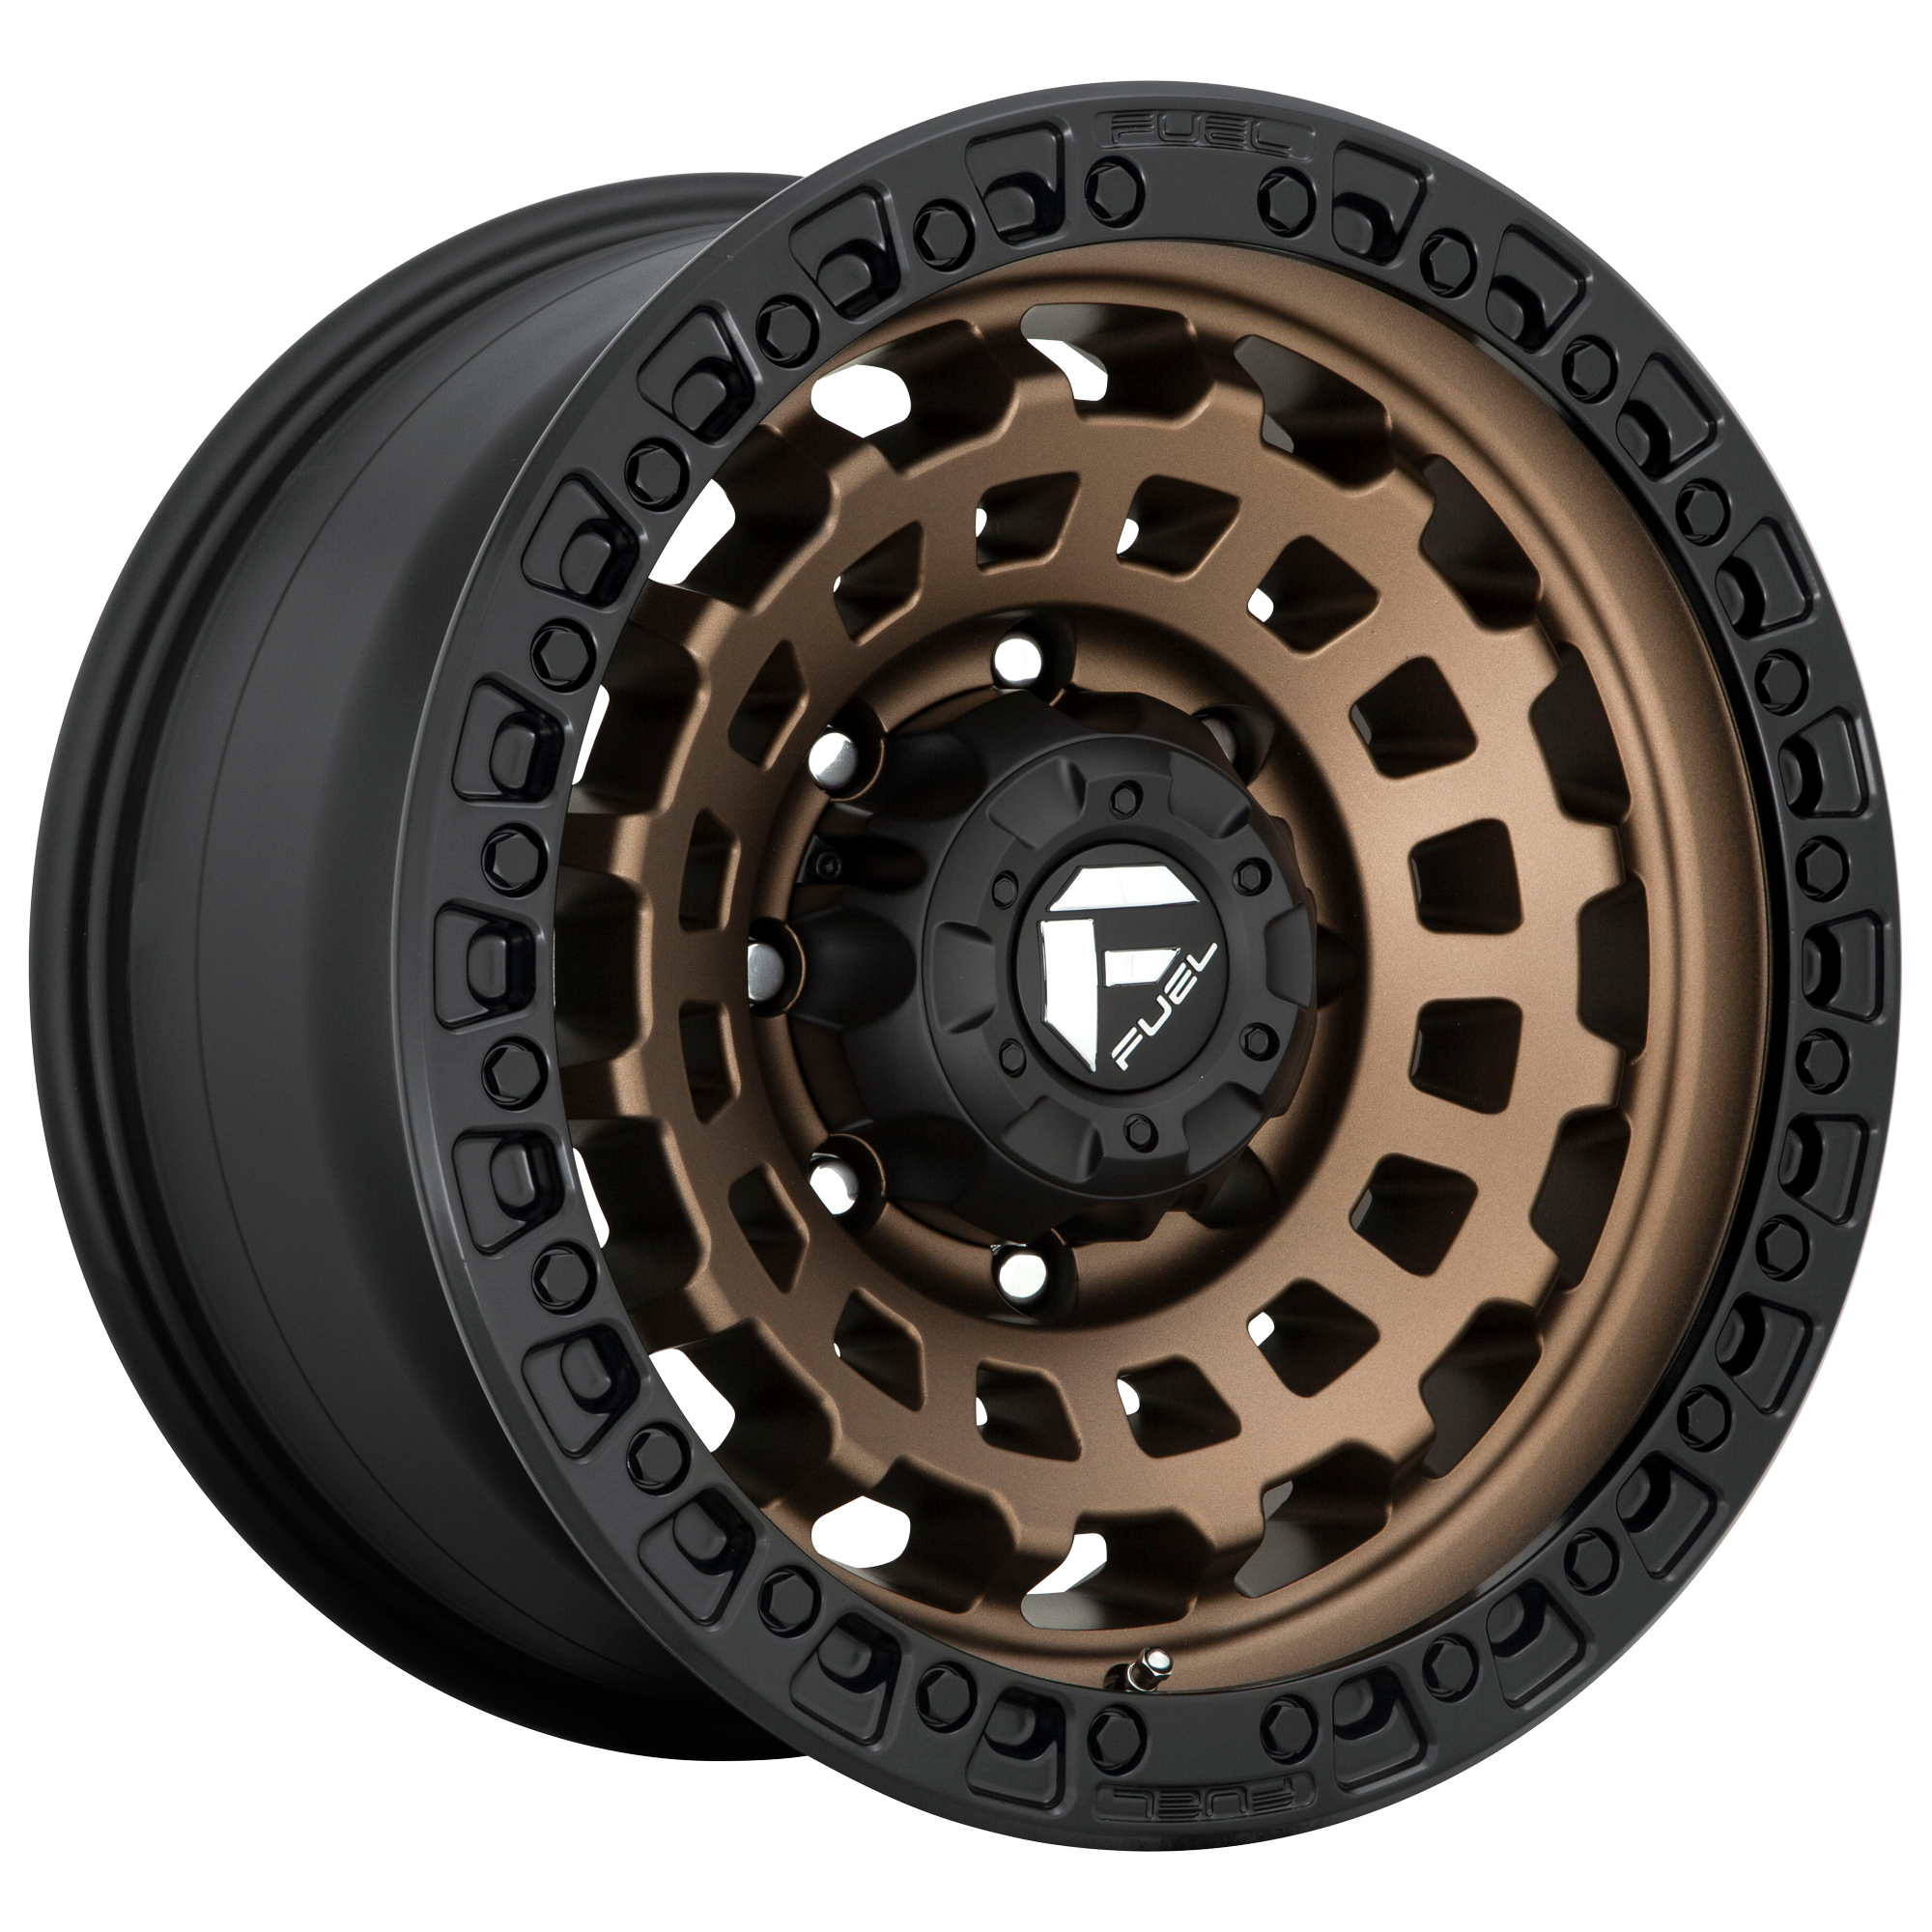 ZEPHYR 20x9 5x127.00 MATTE BRONZE BLACK BEAD RING (1 mm) - Tires and Engine Performance